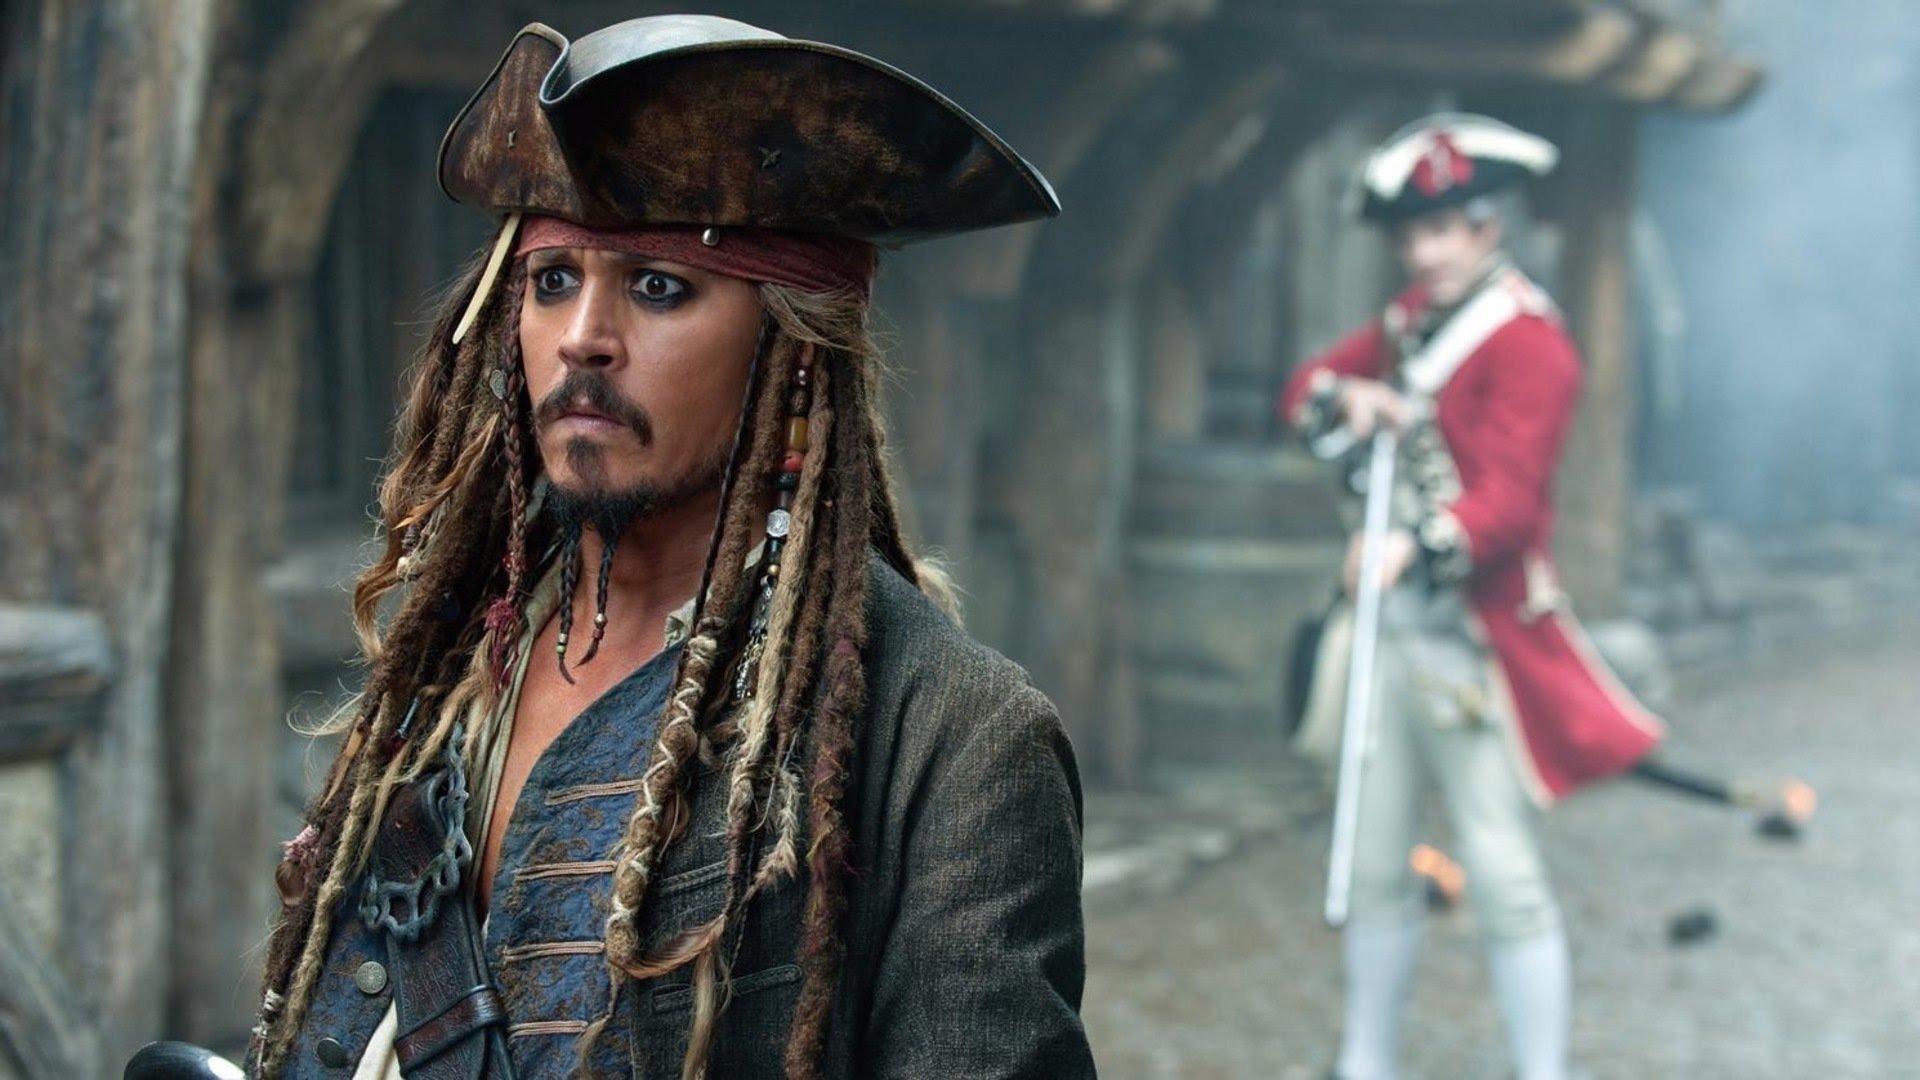 Johnny Depp Would No Longer Play Jack Sparrow In Pirates of the Caribbean